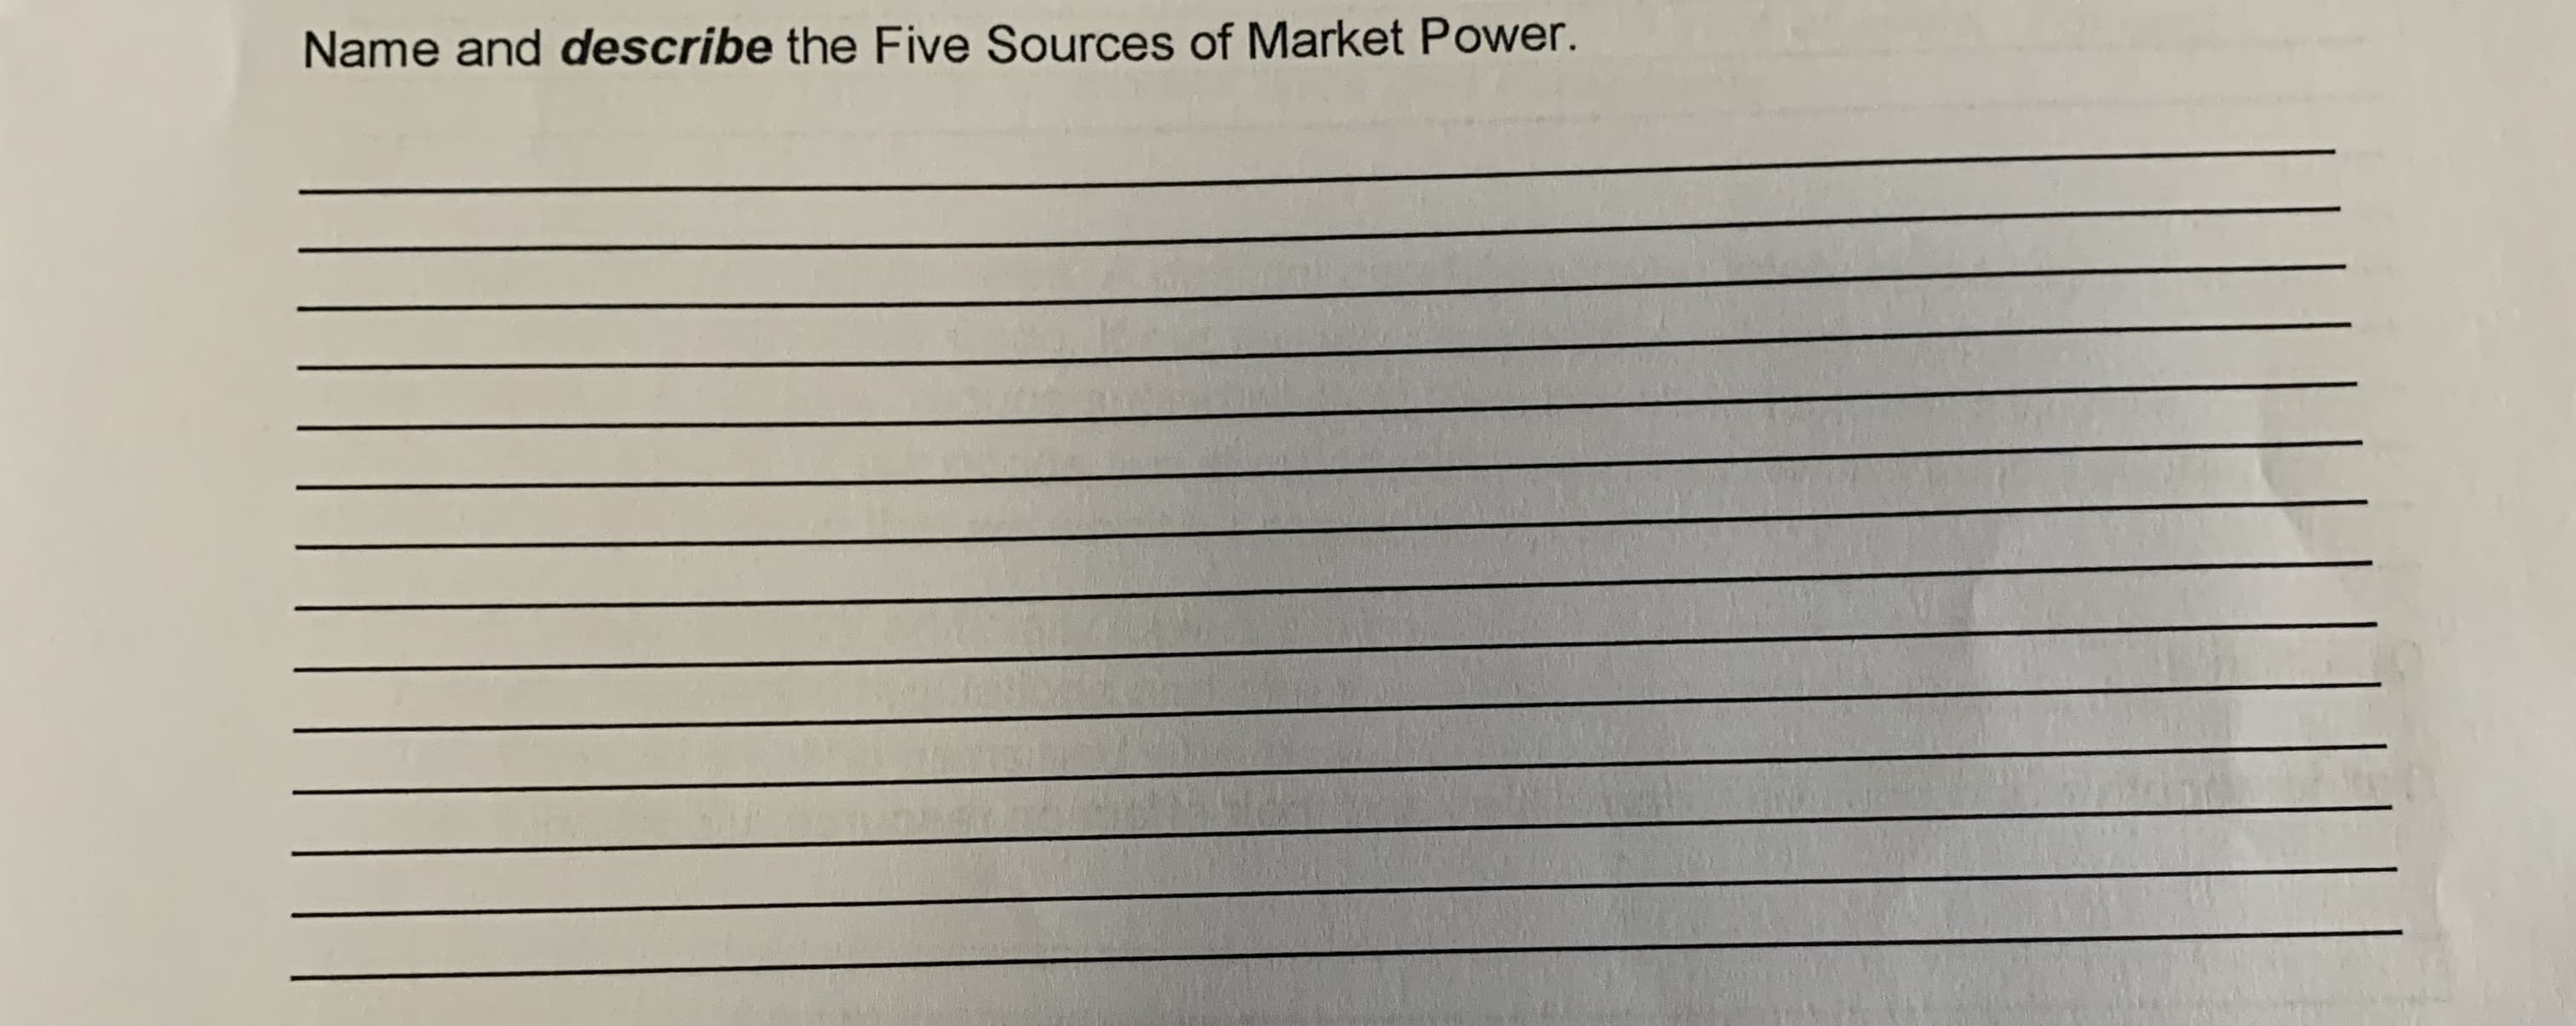 Name and describe the Five Sources of Market Power.
